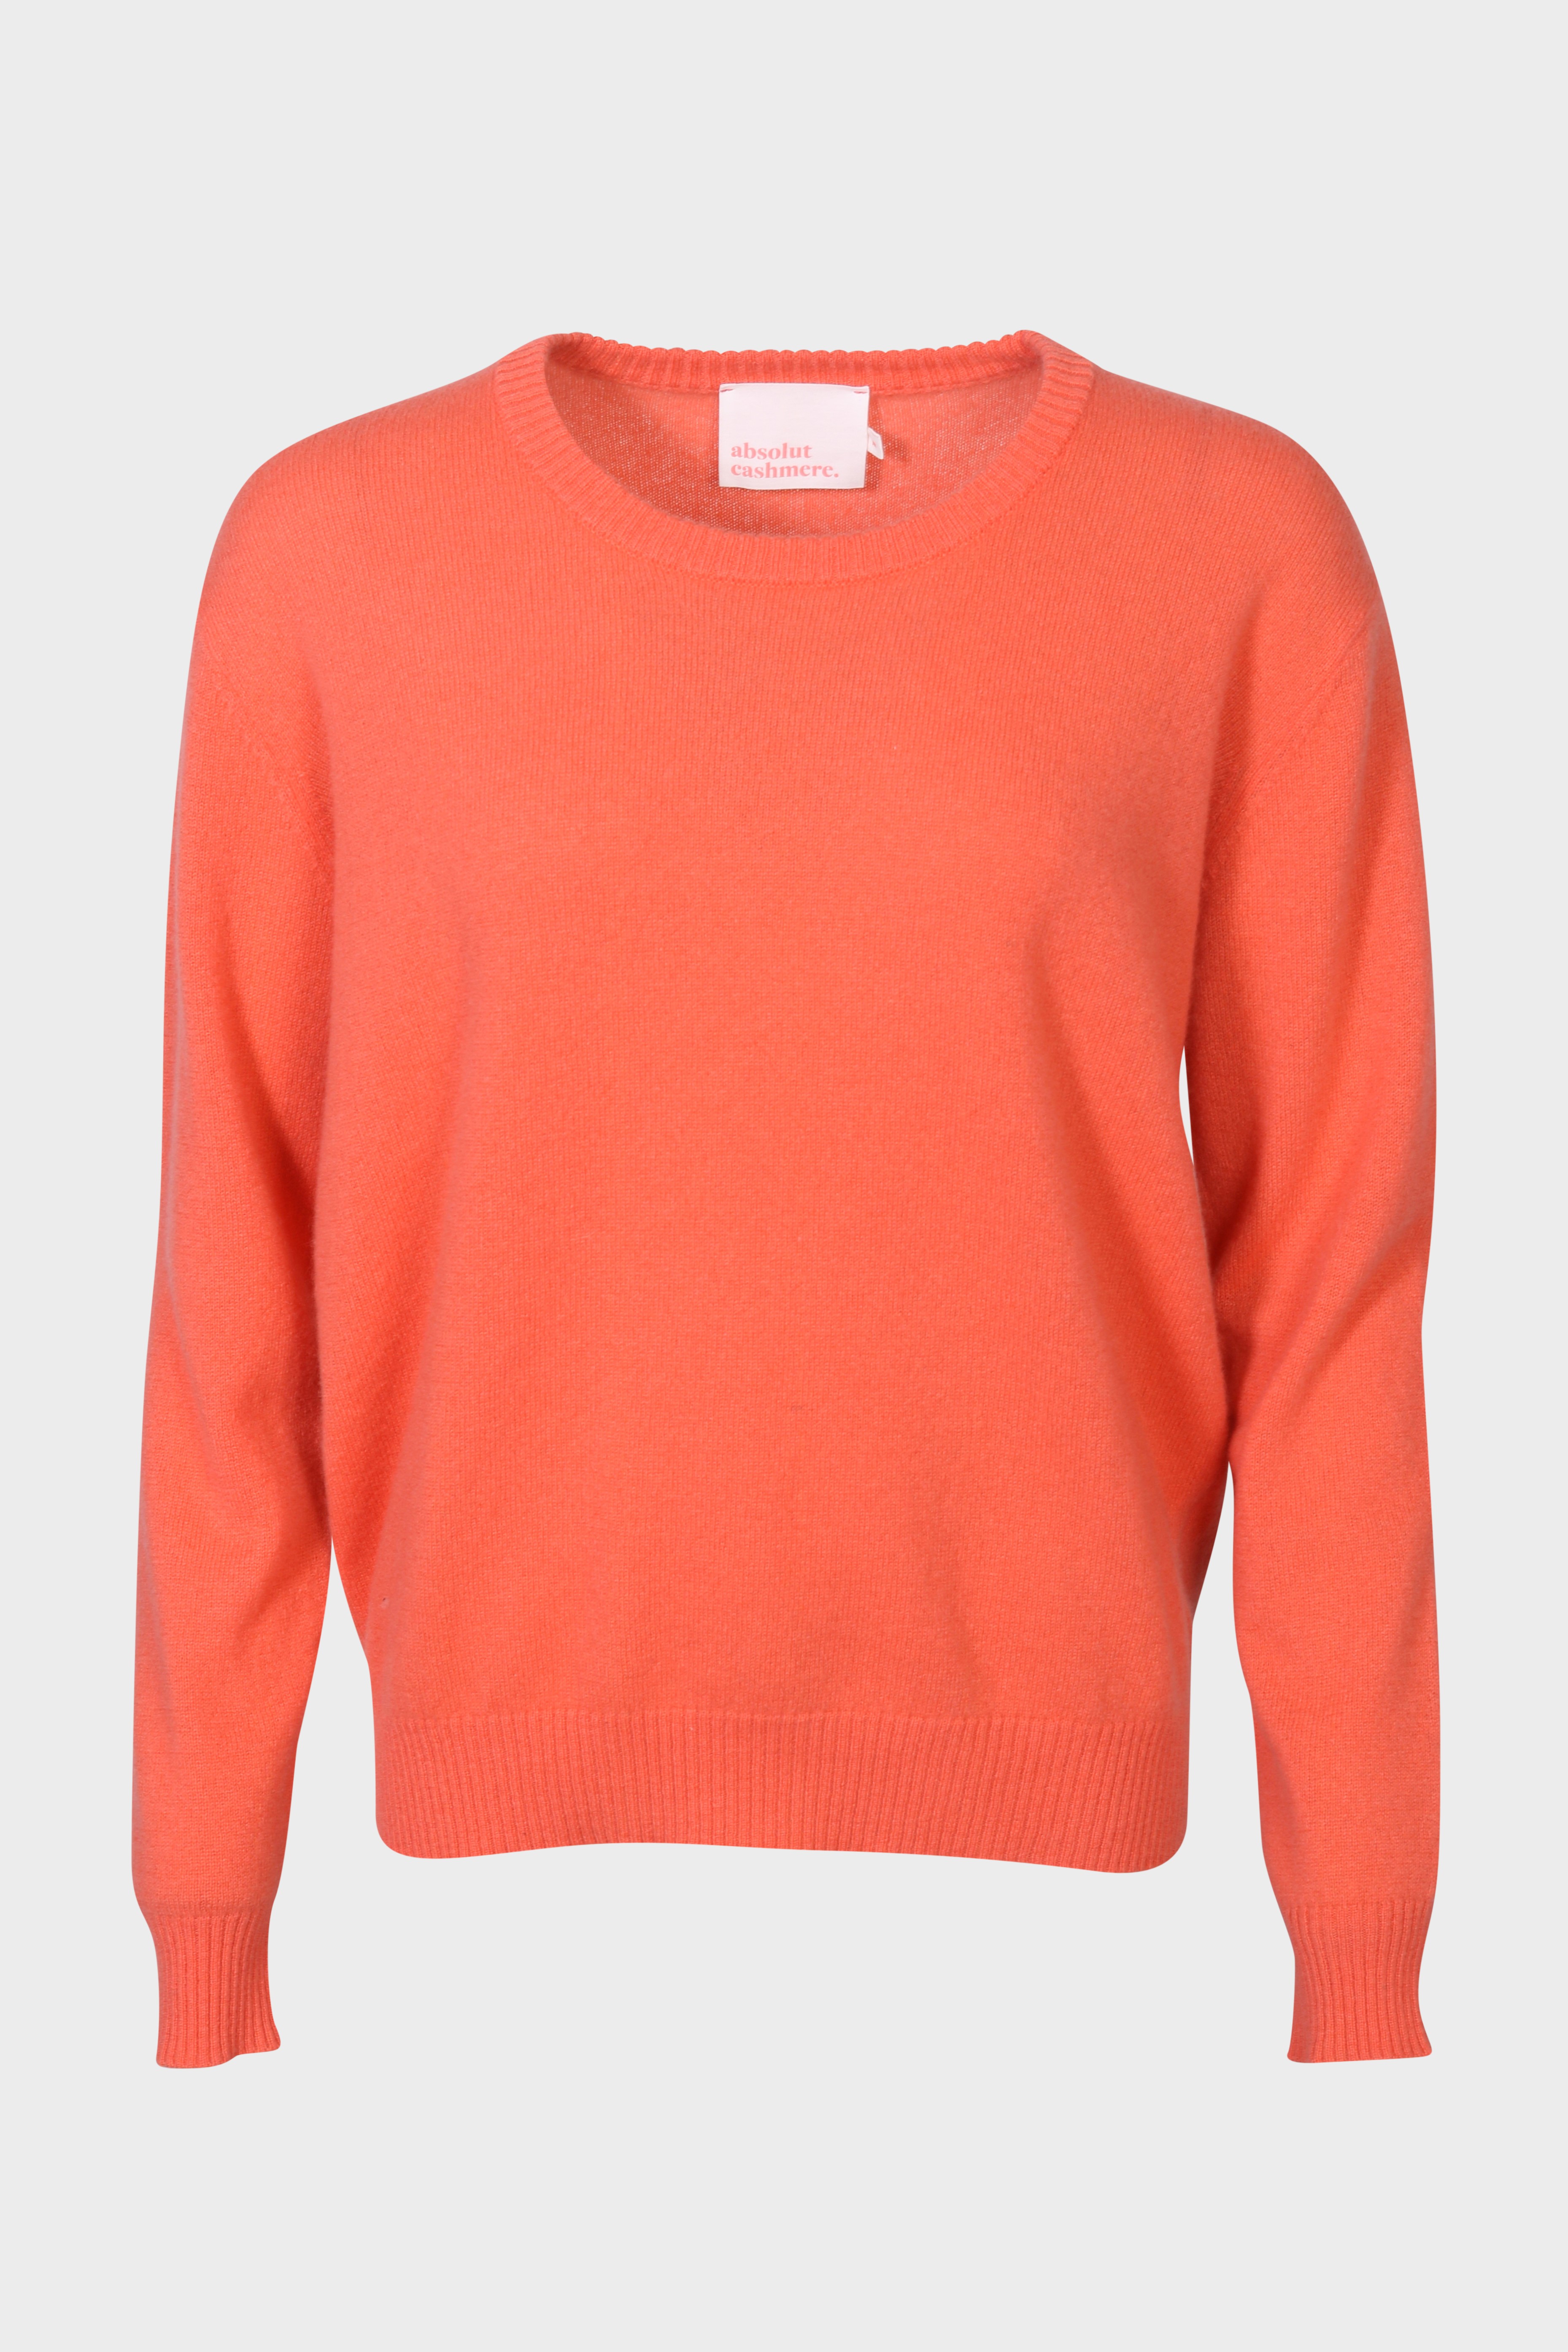 ABSOLUT CASHMERE Sweater Ysee Melon